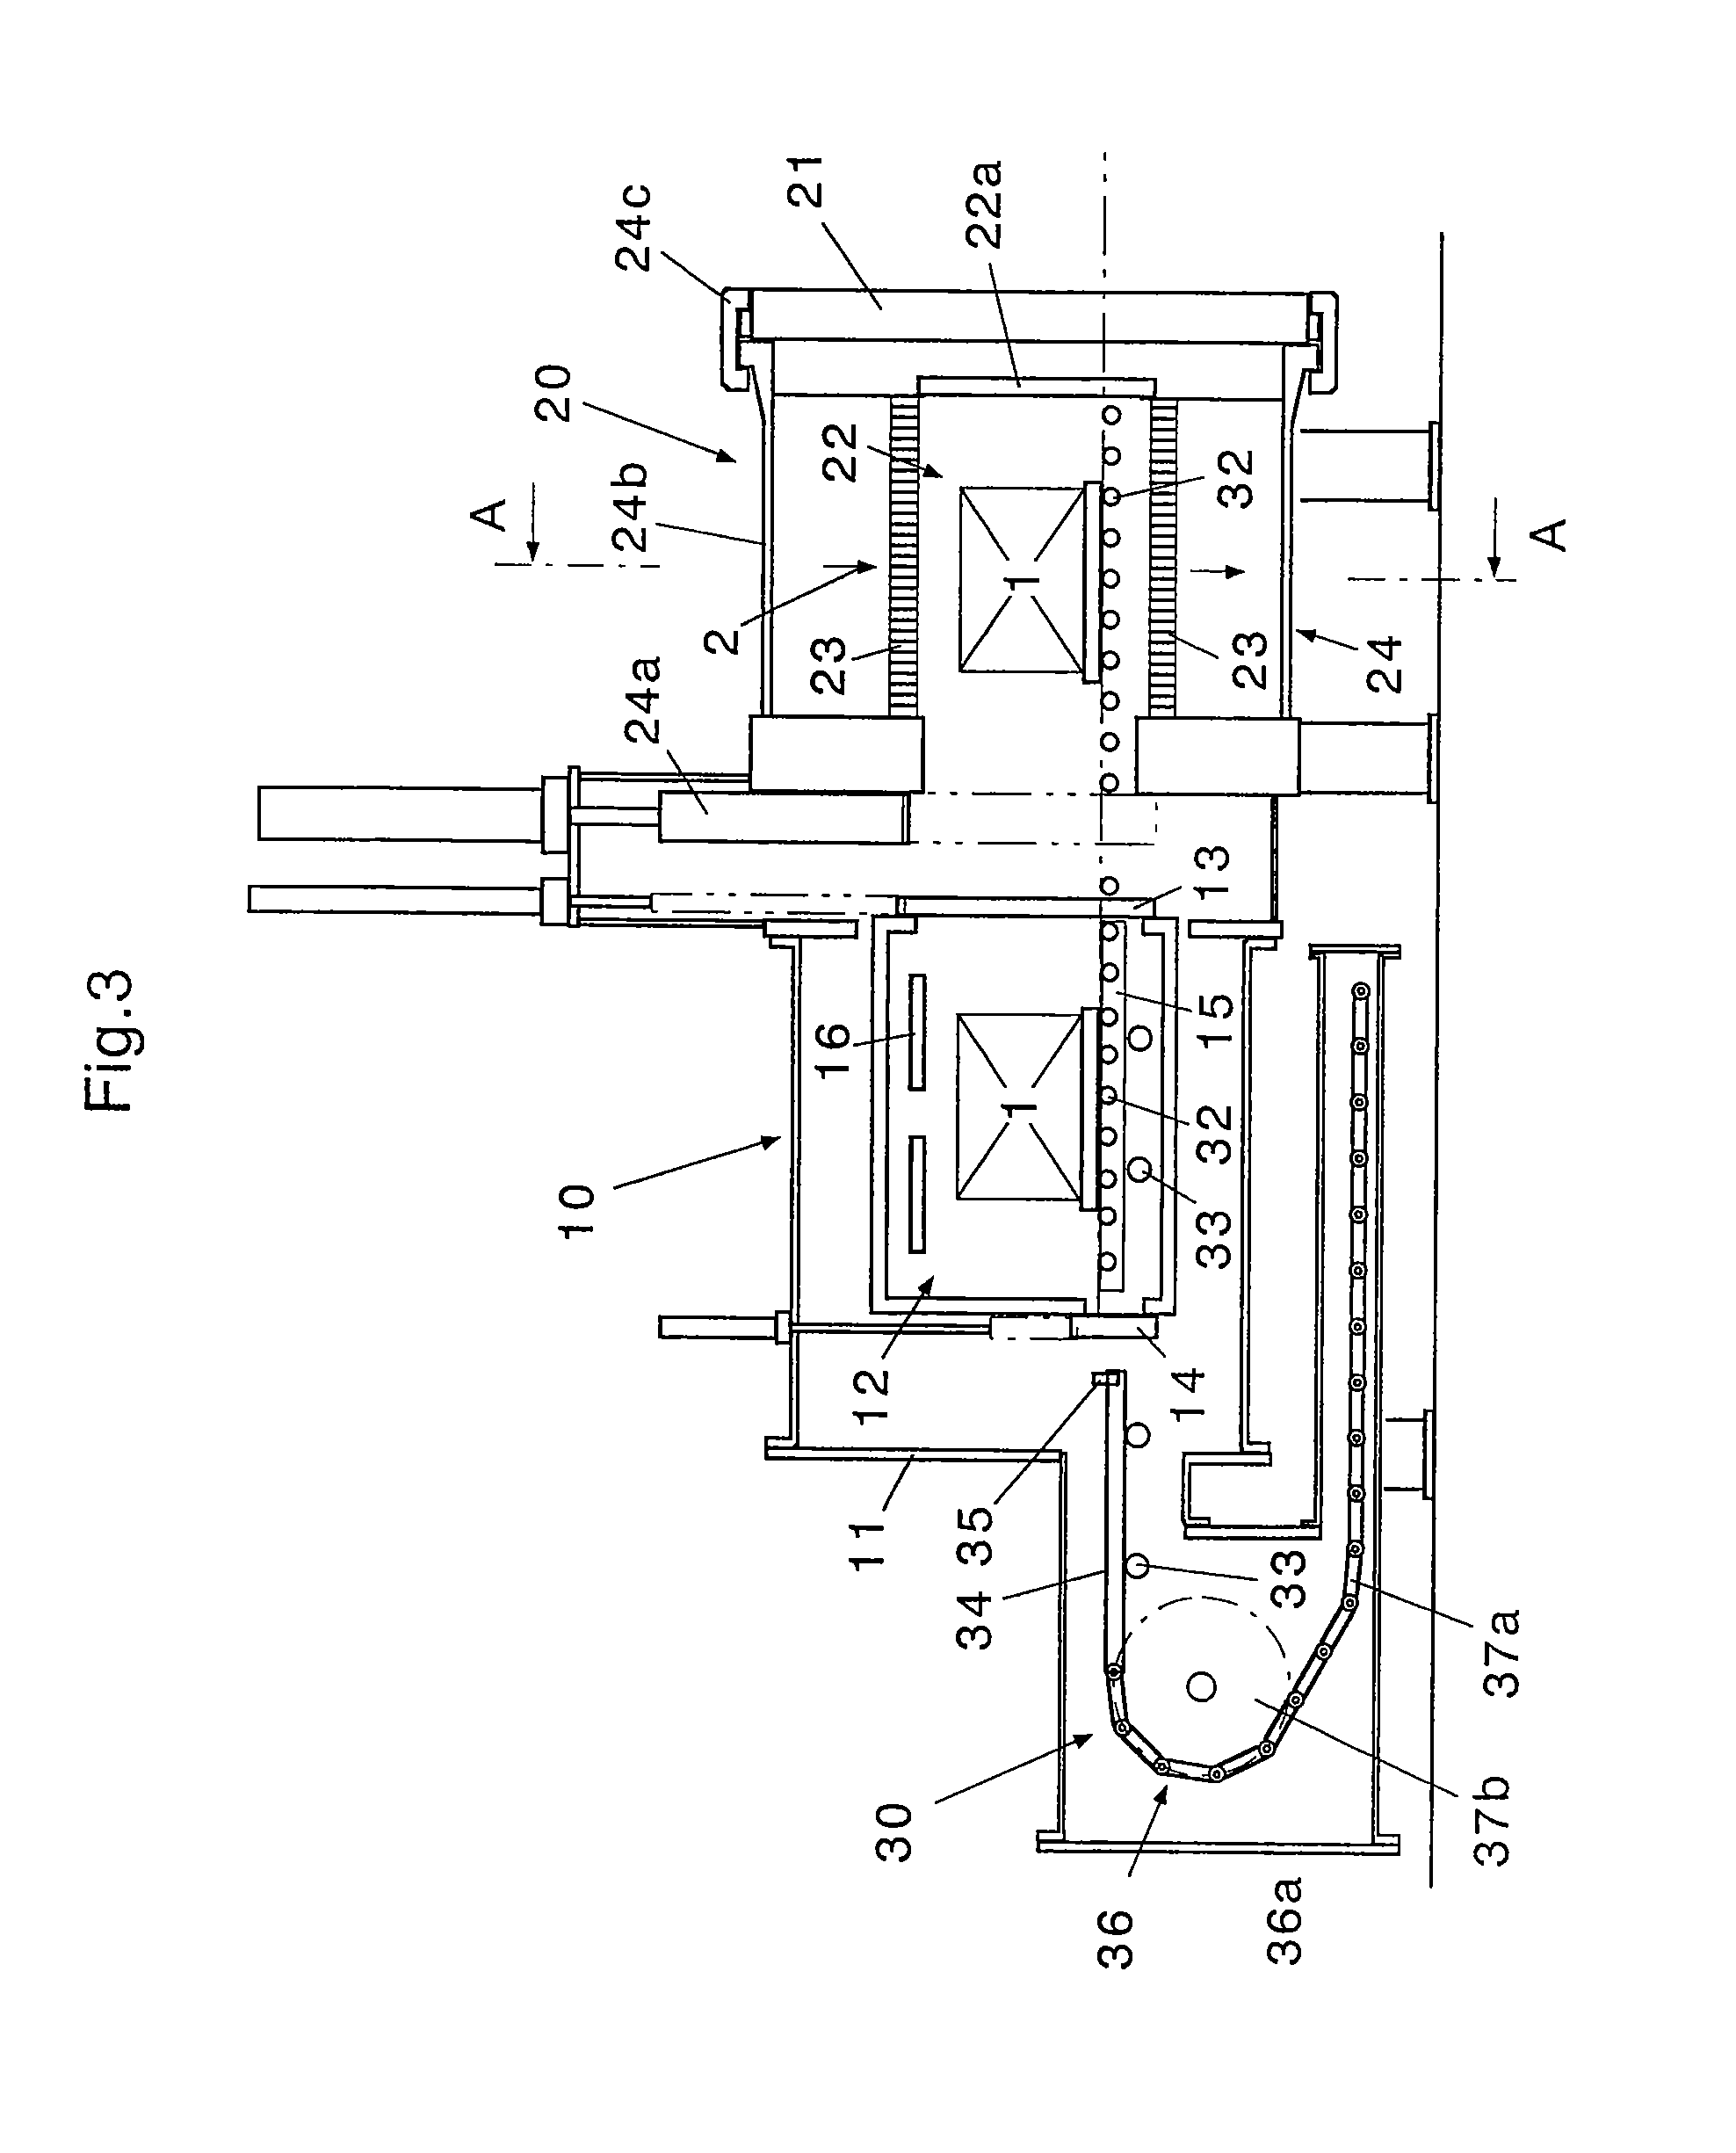 Change-over apparatus for cooling gas passages in vacuum heat treating furnace